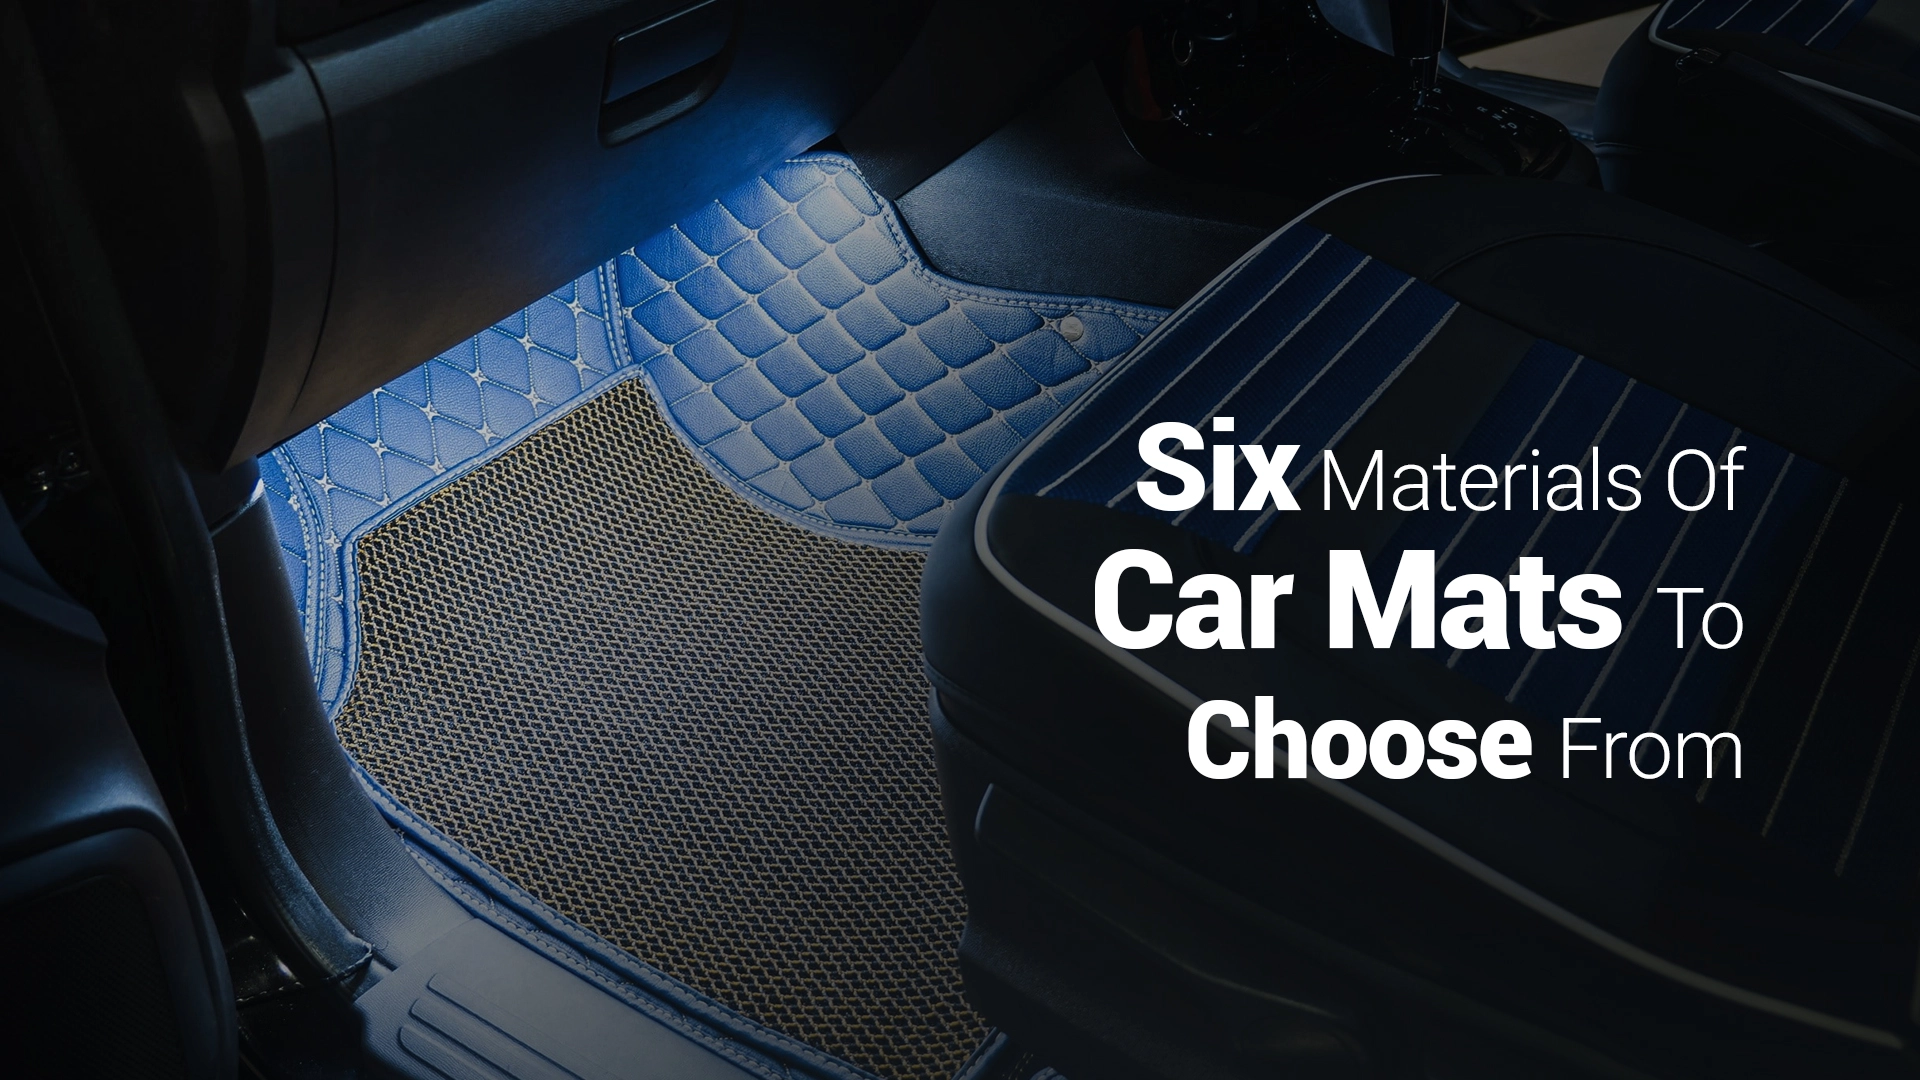 Things to Consider for Buying Car Mats: Material, Cost & More